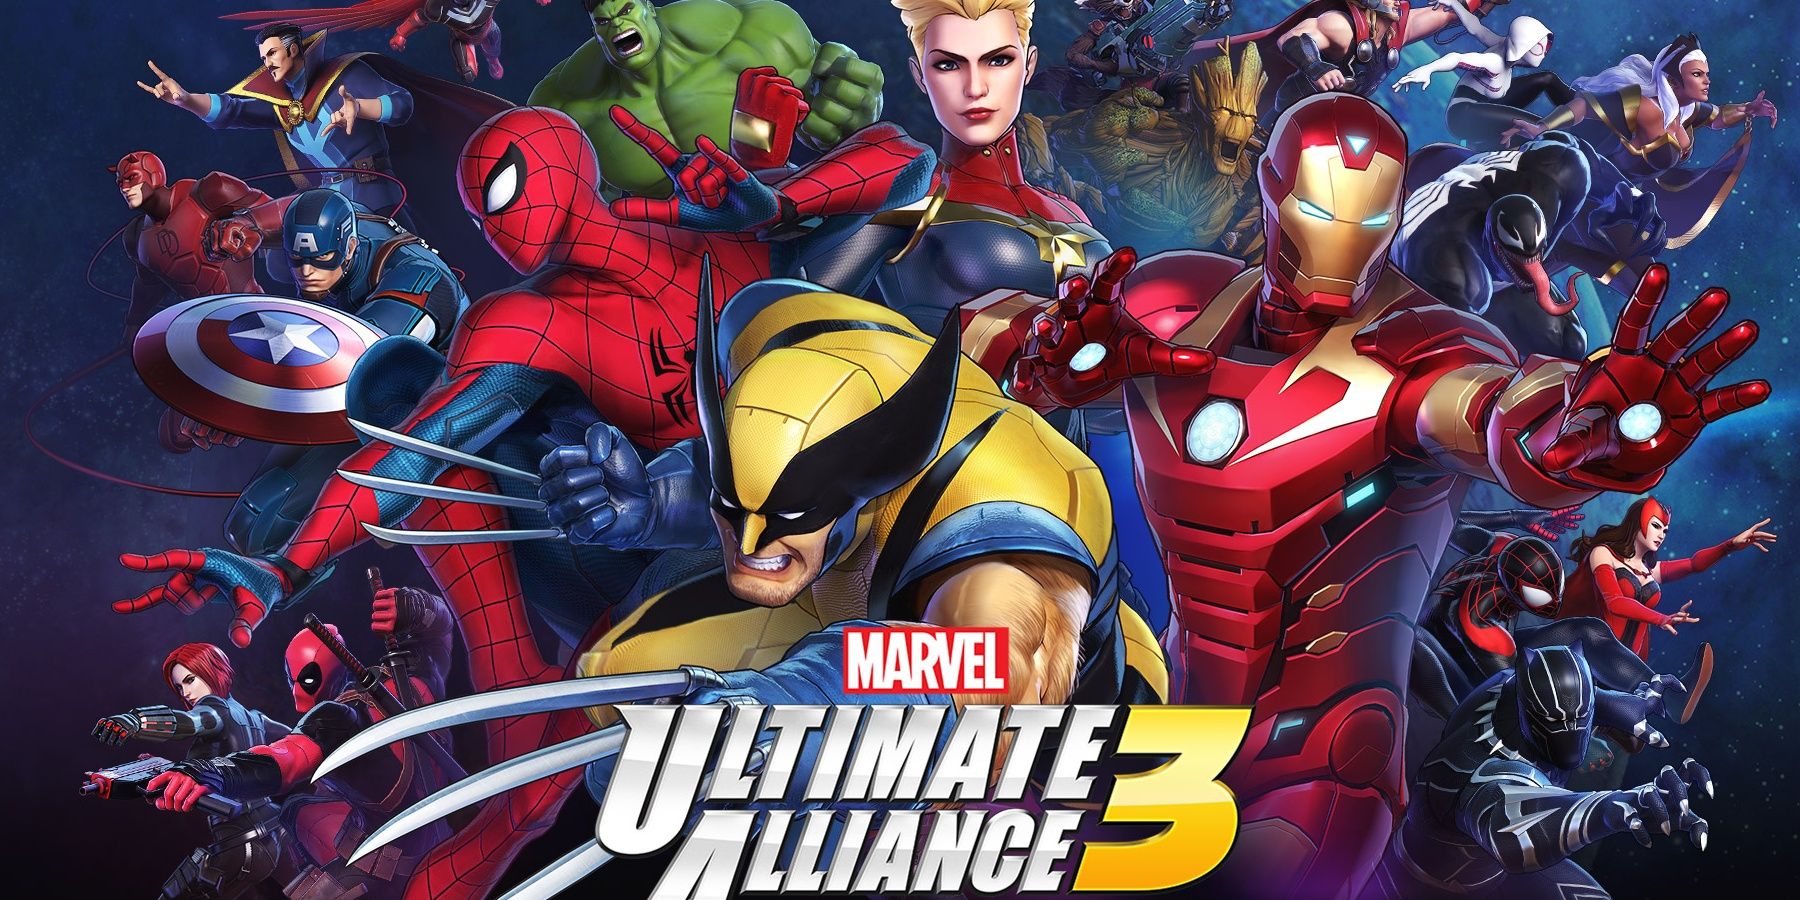 Marvel Ultimate Alliance 3 The Black Order logo with wolverine spiderman captain marvel and iron man